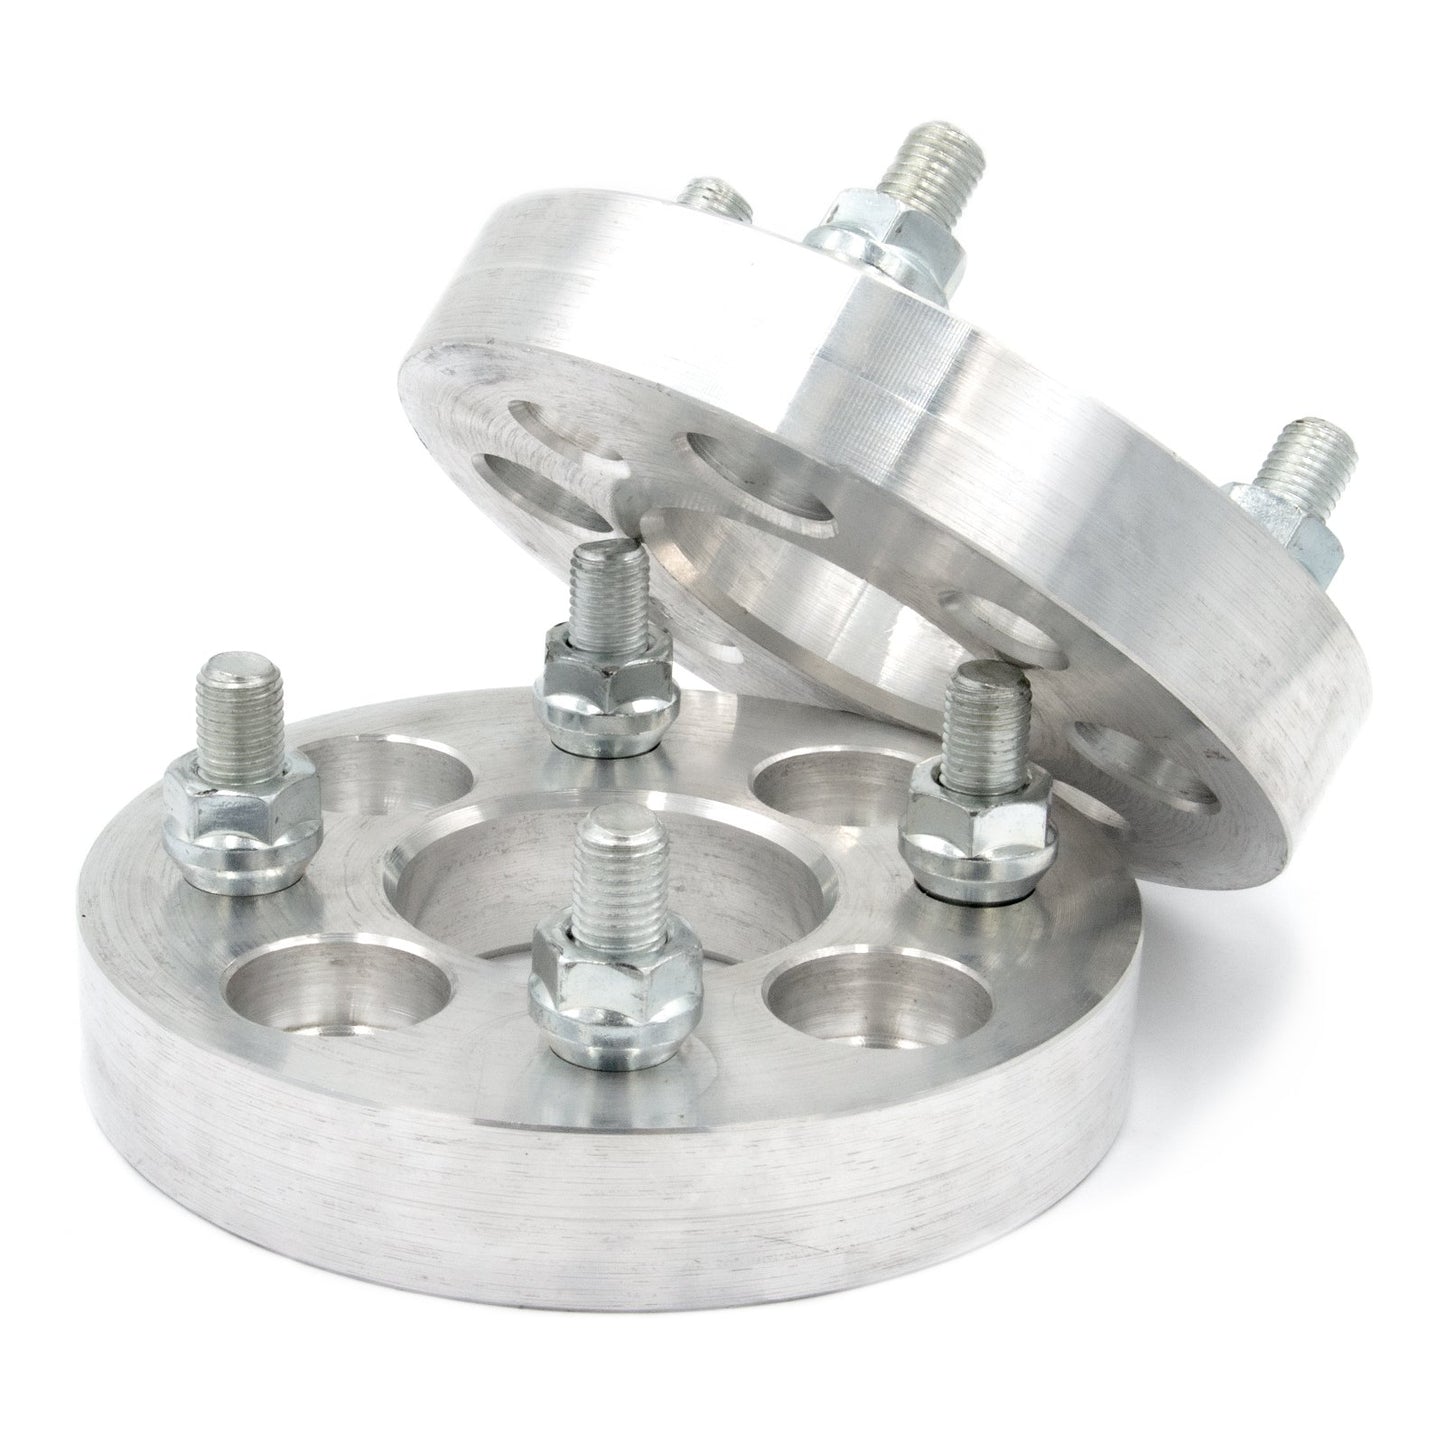 4x100 to 4x4.25" Wheel Spacer/Adapter - Thickness: 3/4"- 4"